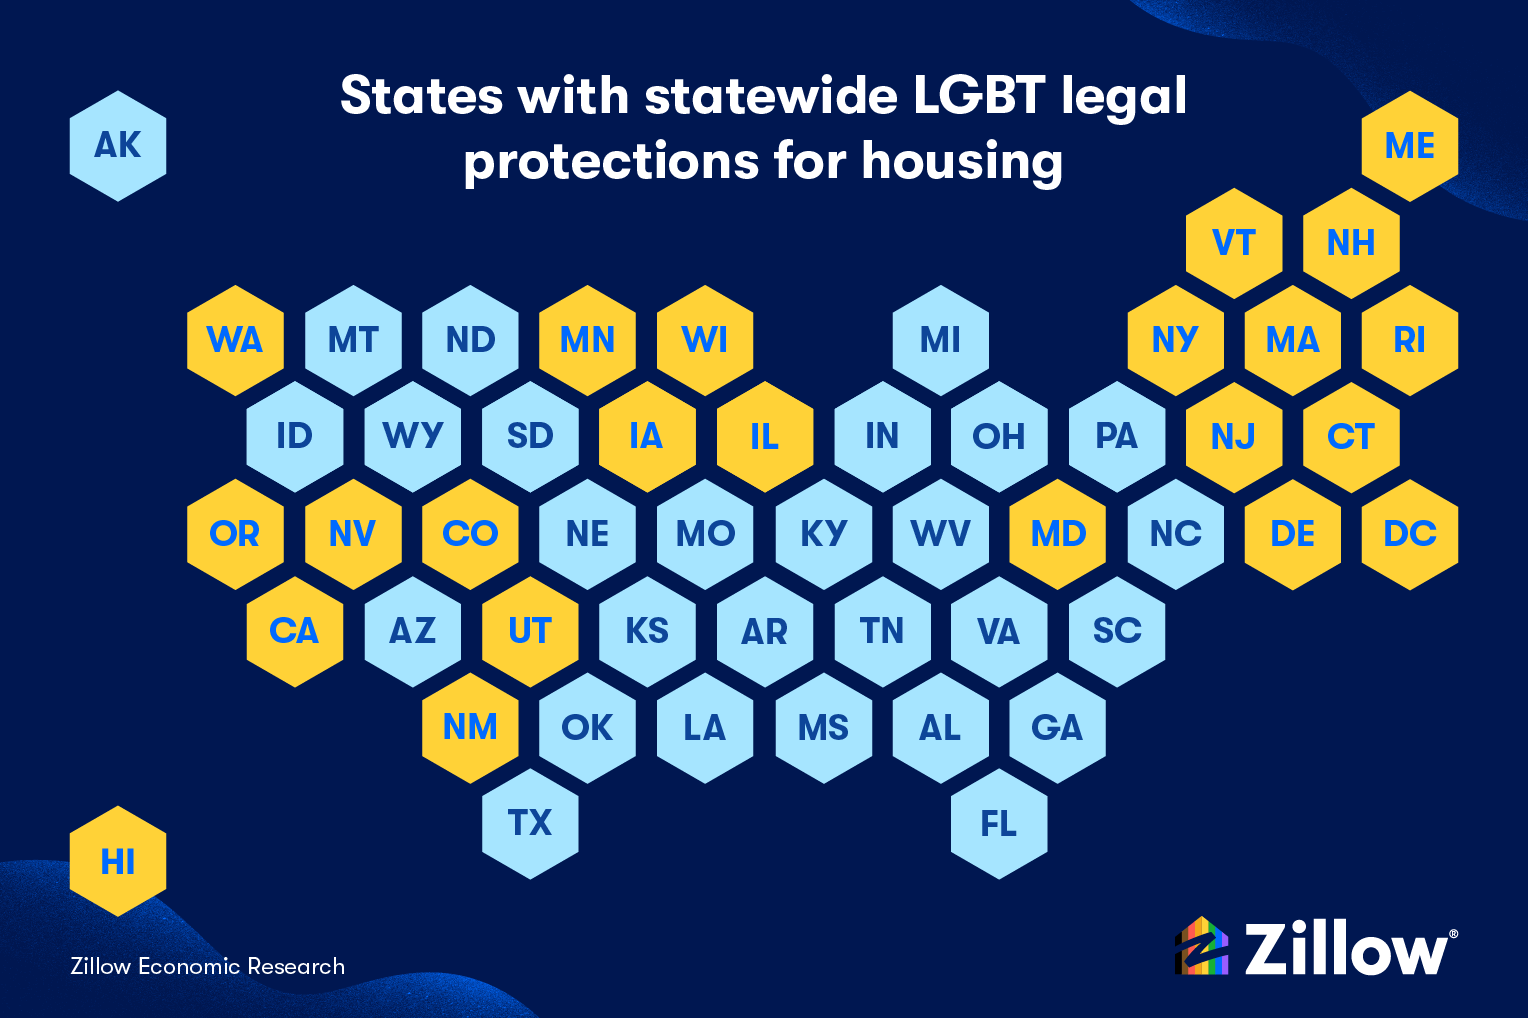 map of the united states that highlights states wtih statewide LGBT legal protections for housing